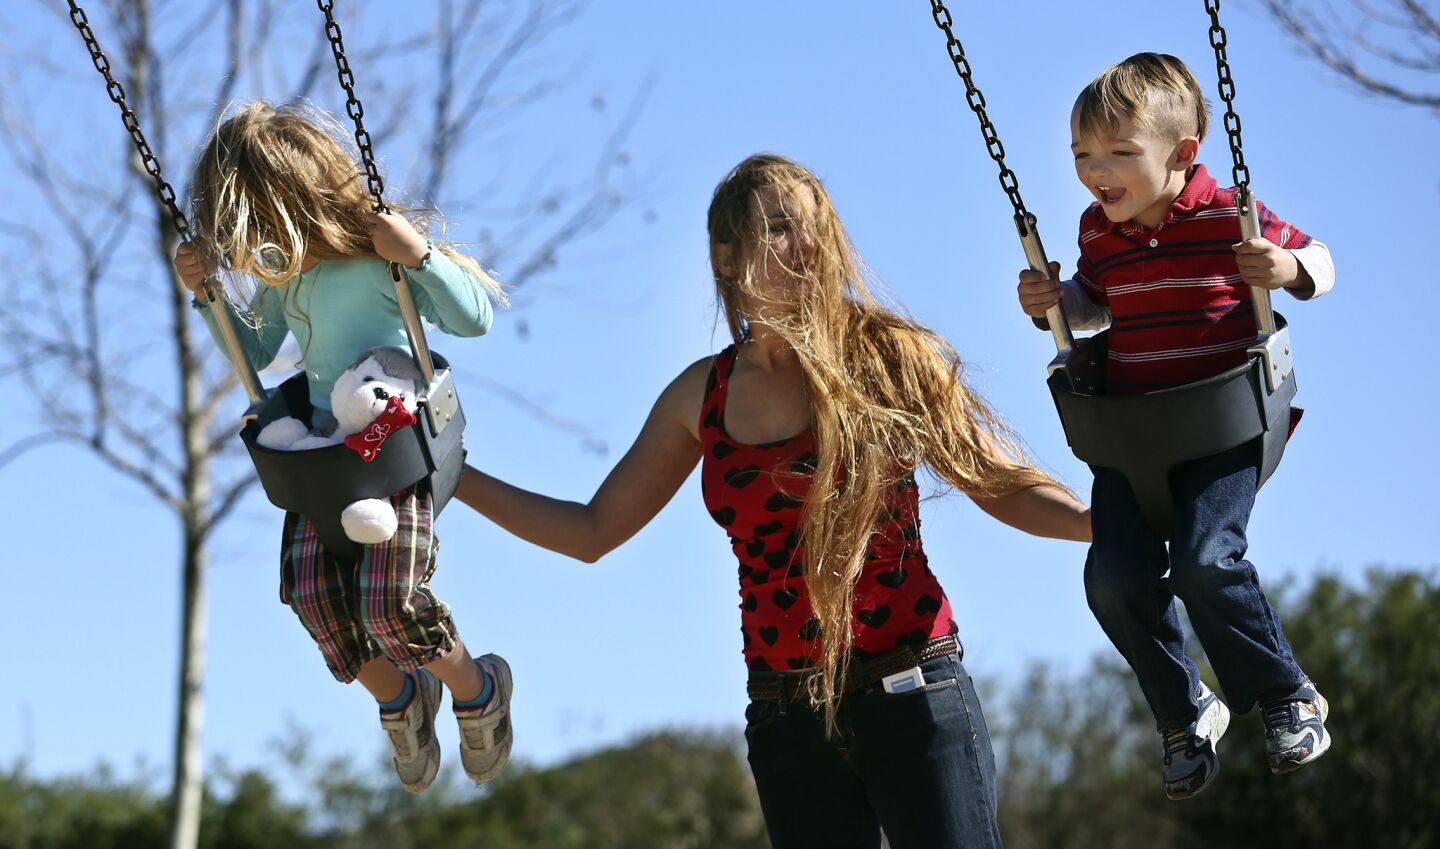 Holly Di Renzo gives her daughter Bella, 4, left, and son Dante, 3, a push, as they ride on the swings at Lost Canyon Park in Simi Valley.